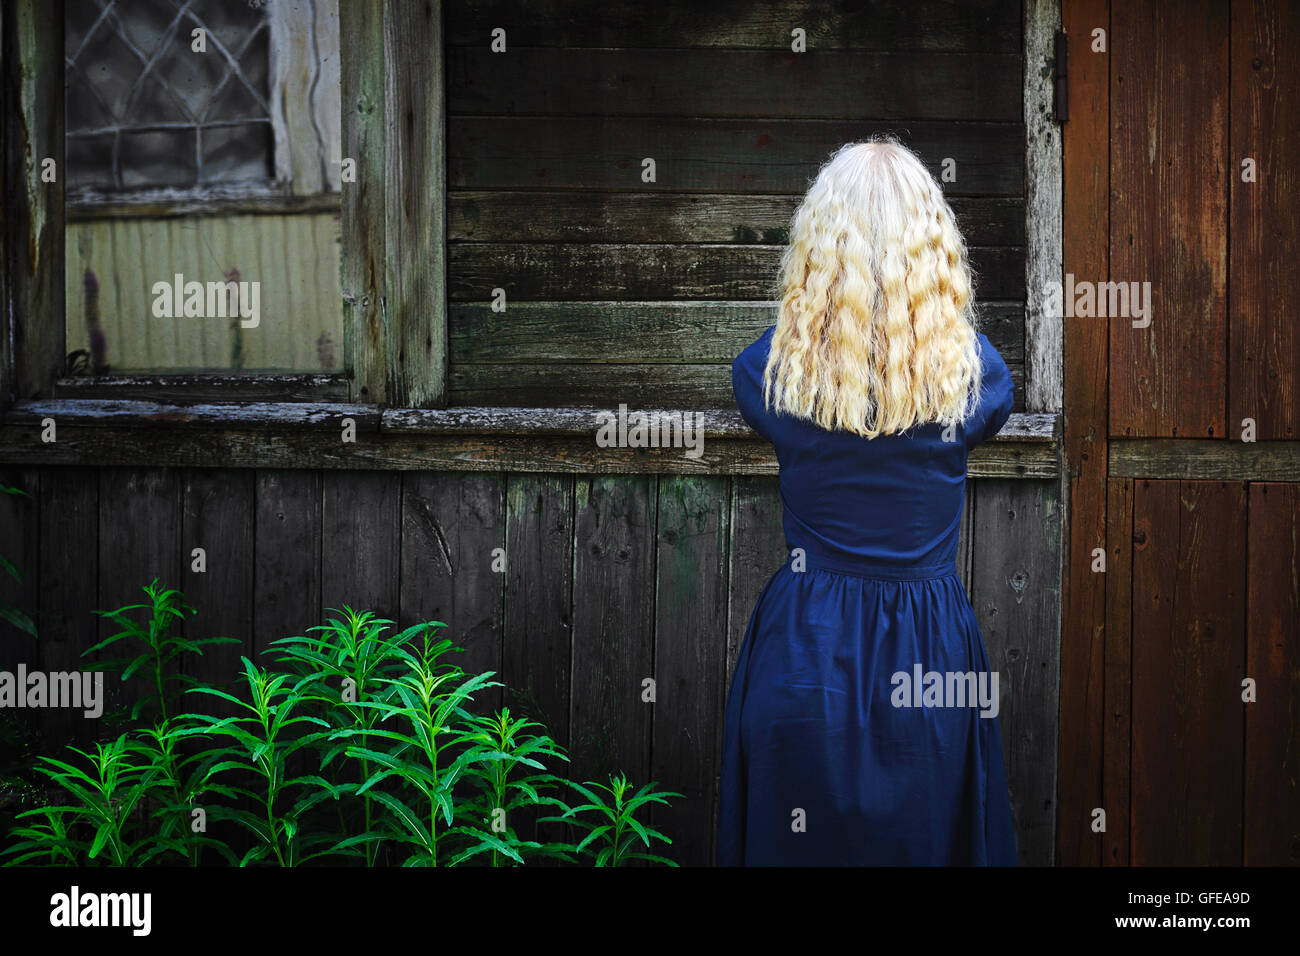 Girl with long blond hair in the blue dress standing at the old wooden shed Stock Photo